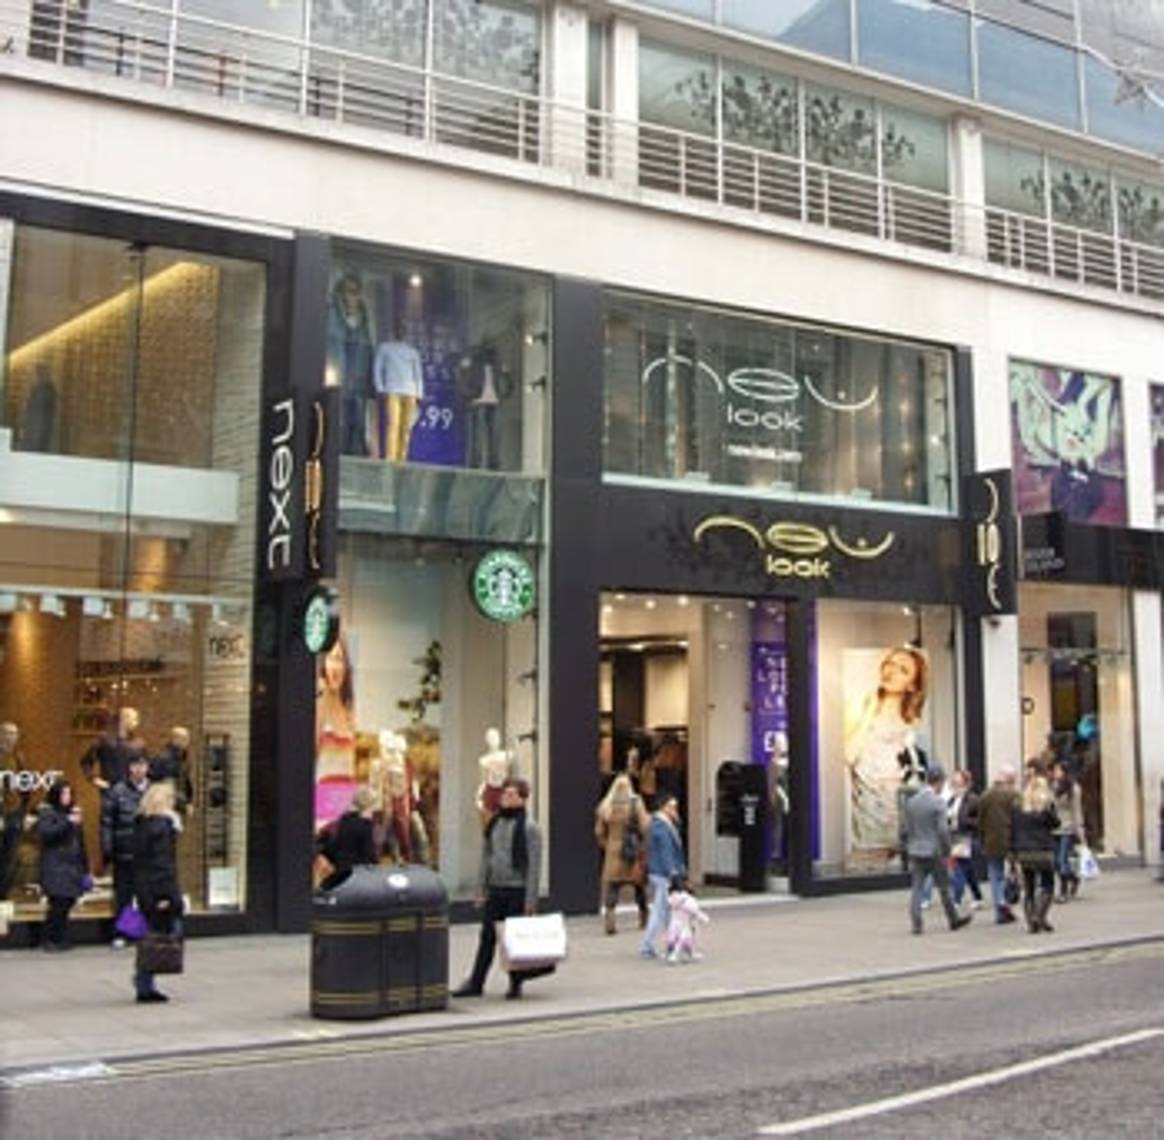 New Look named as Britain’s favourite fashion retailer